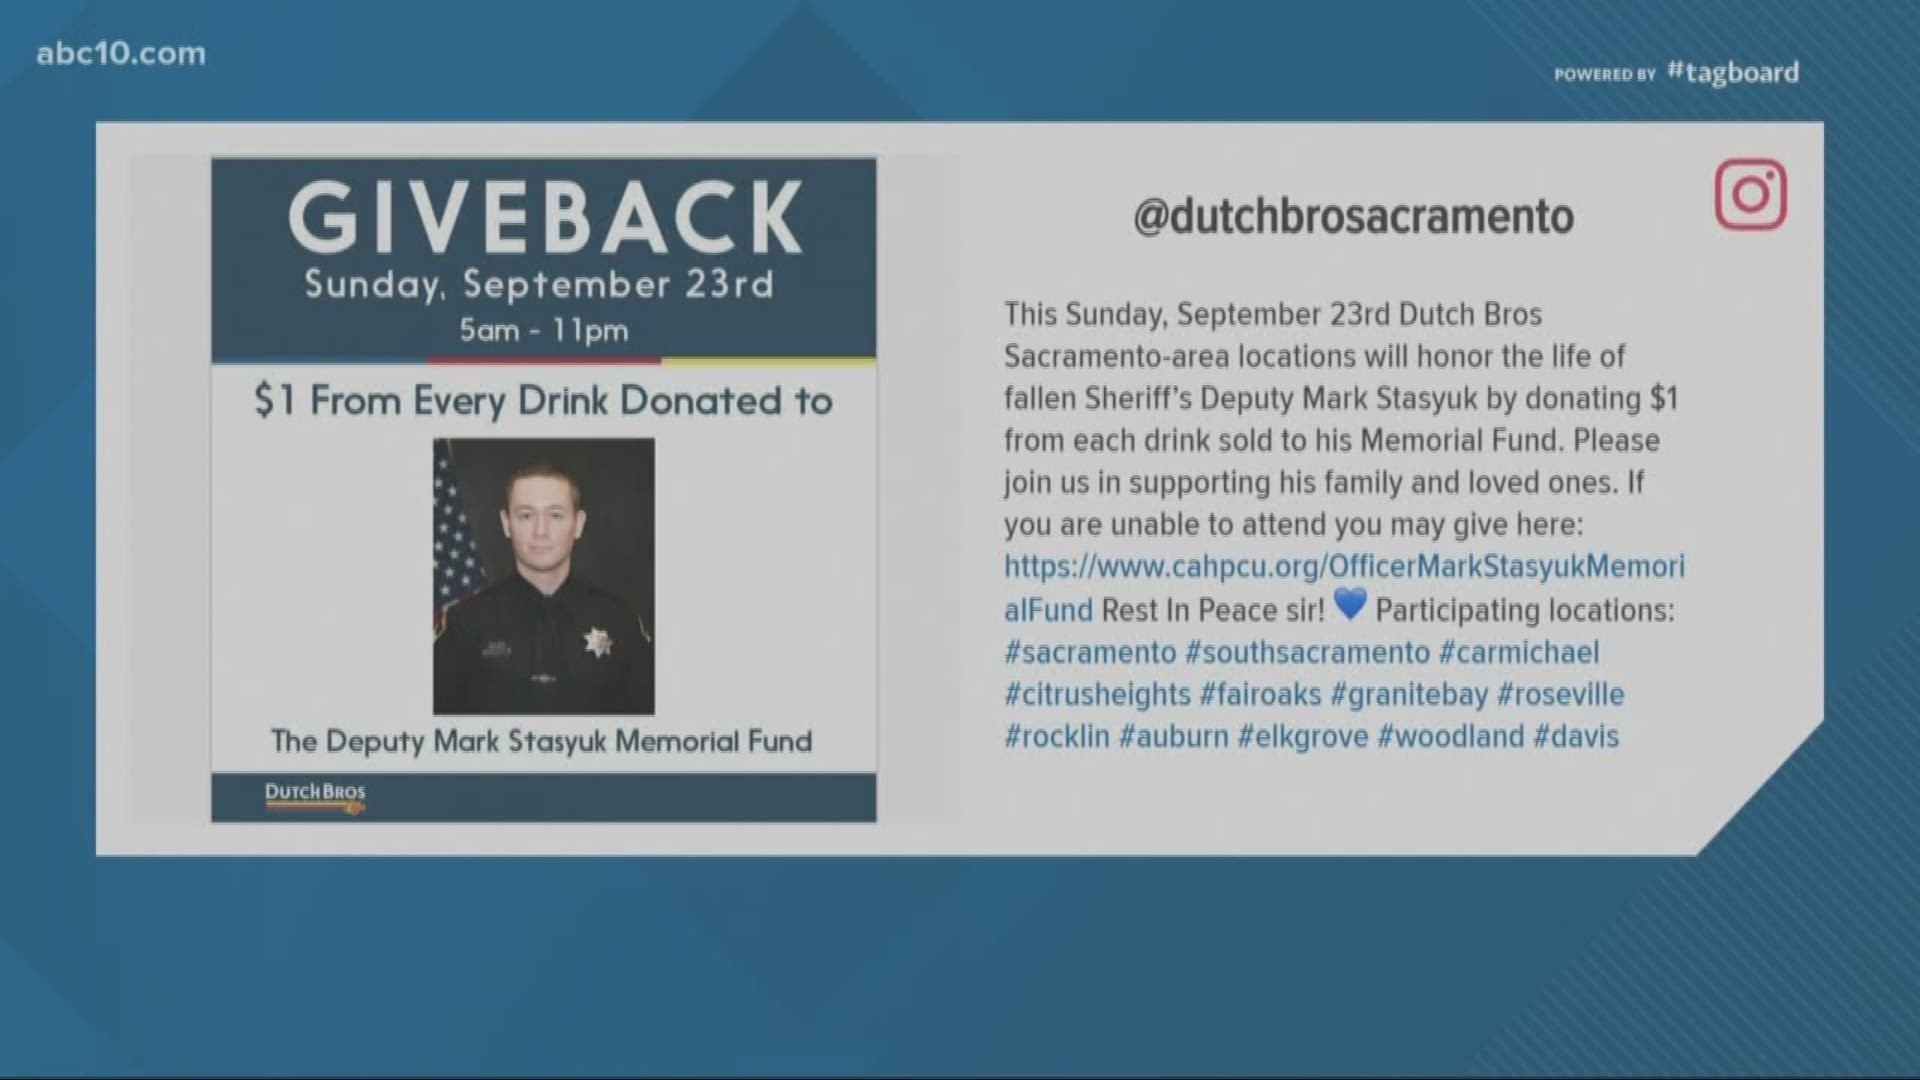 On Sunday, September 23, Dutch Bros locations in the Sacramento area will donate $1 from each drink sold to a memorial fund for fallen Sacramento County Sheriff's Deputy Mark Stasyuk.